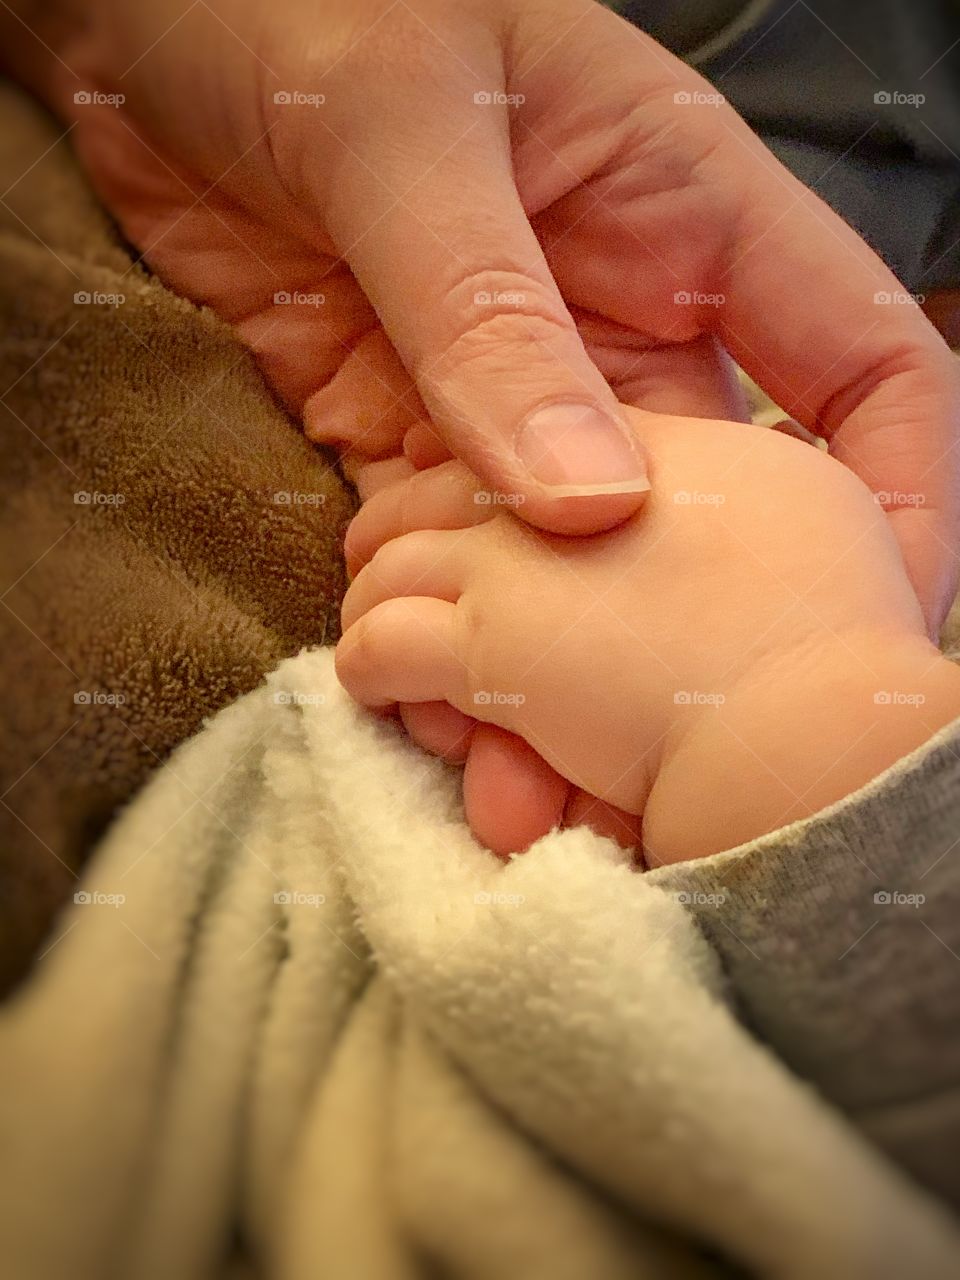 a warm picture of my wife holding our daughter’s hand on a relaxing night at home